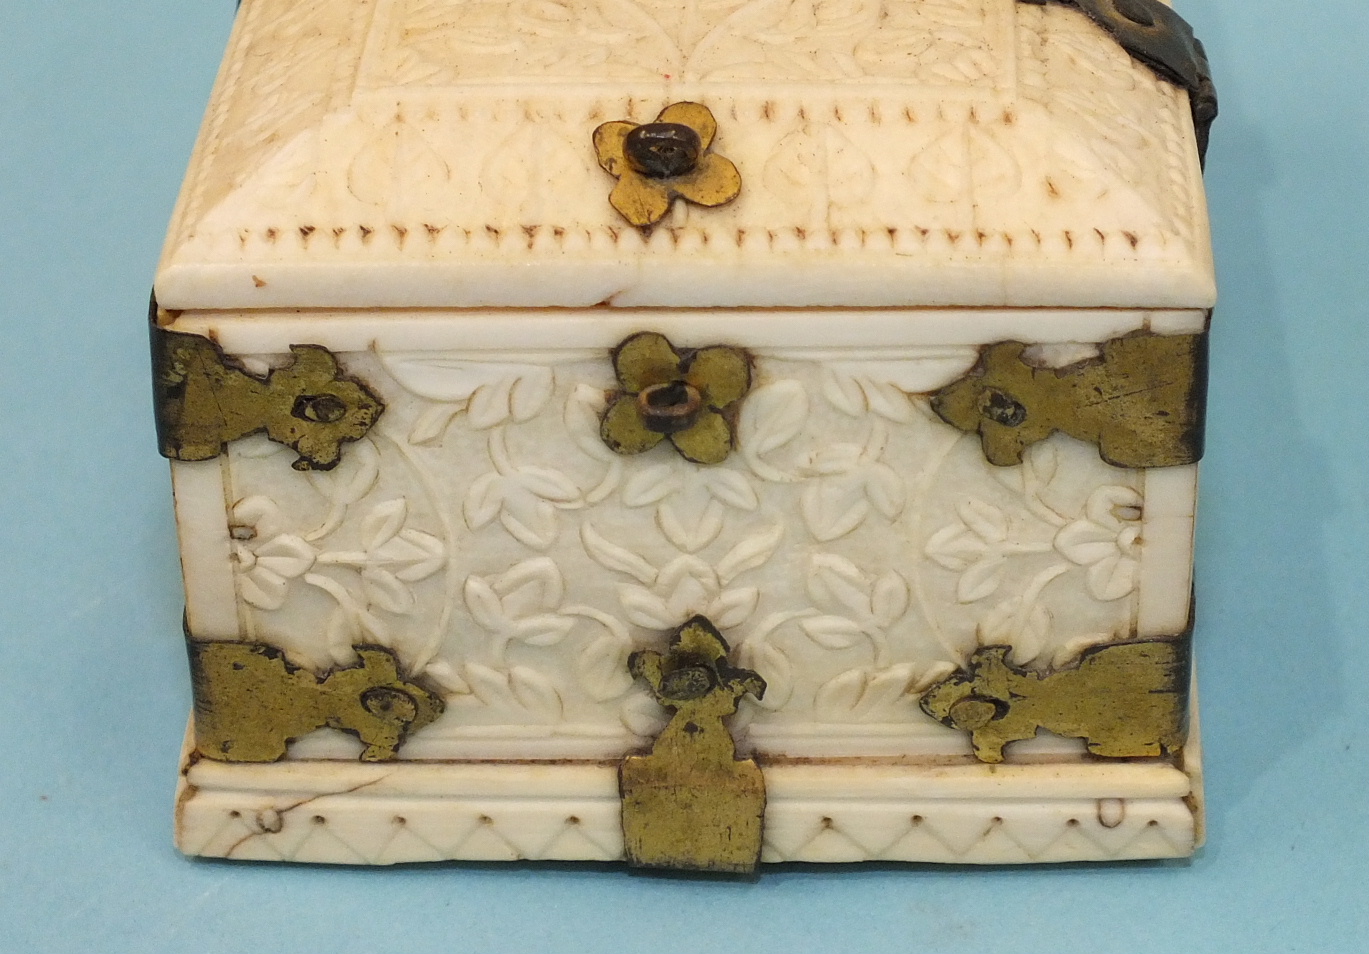 An early-20th century carved ivory and gilt-metal-bound casket carved with overall foliate design, - Image 3 of 5